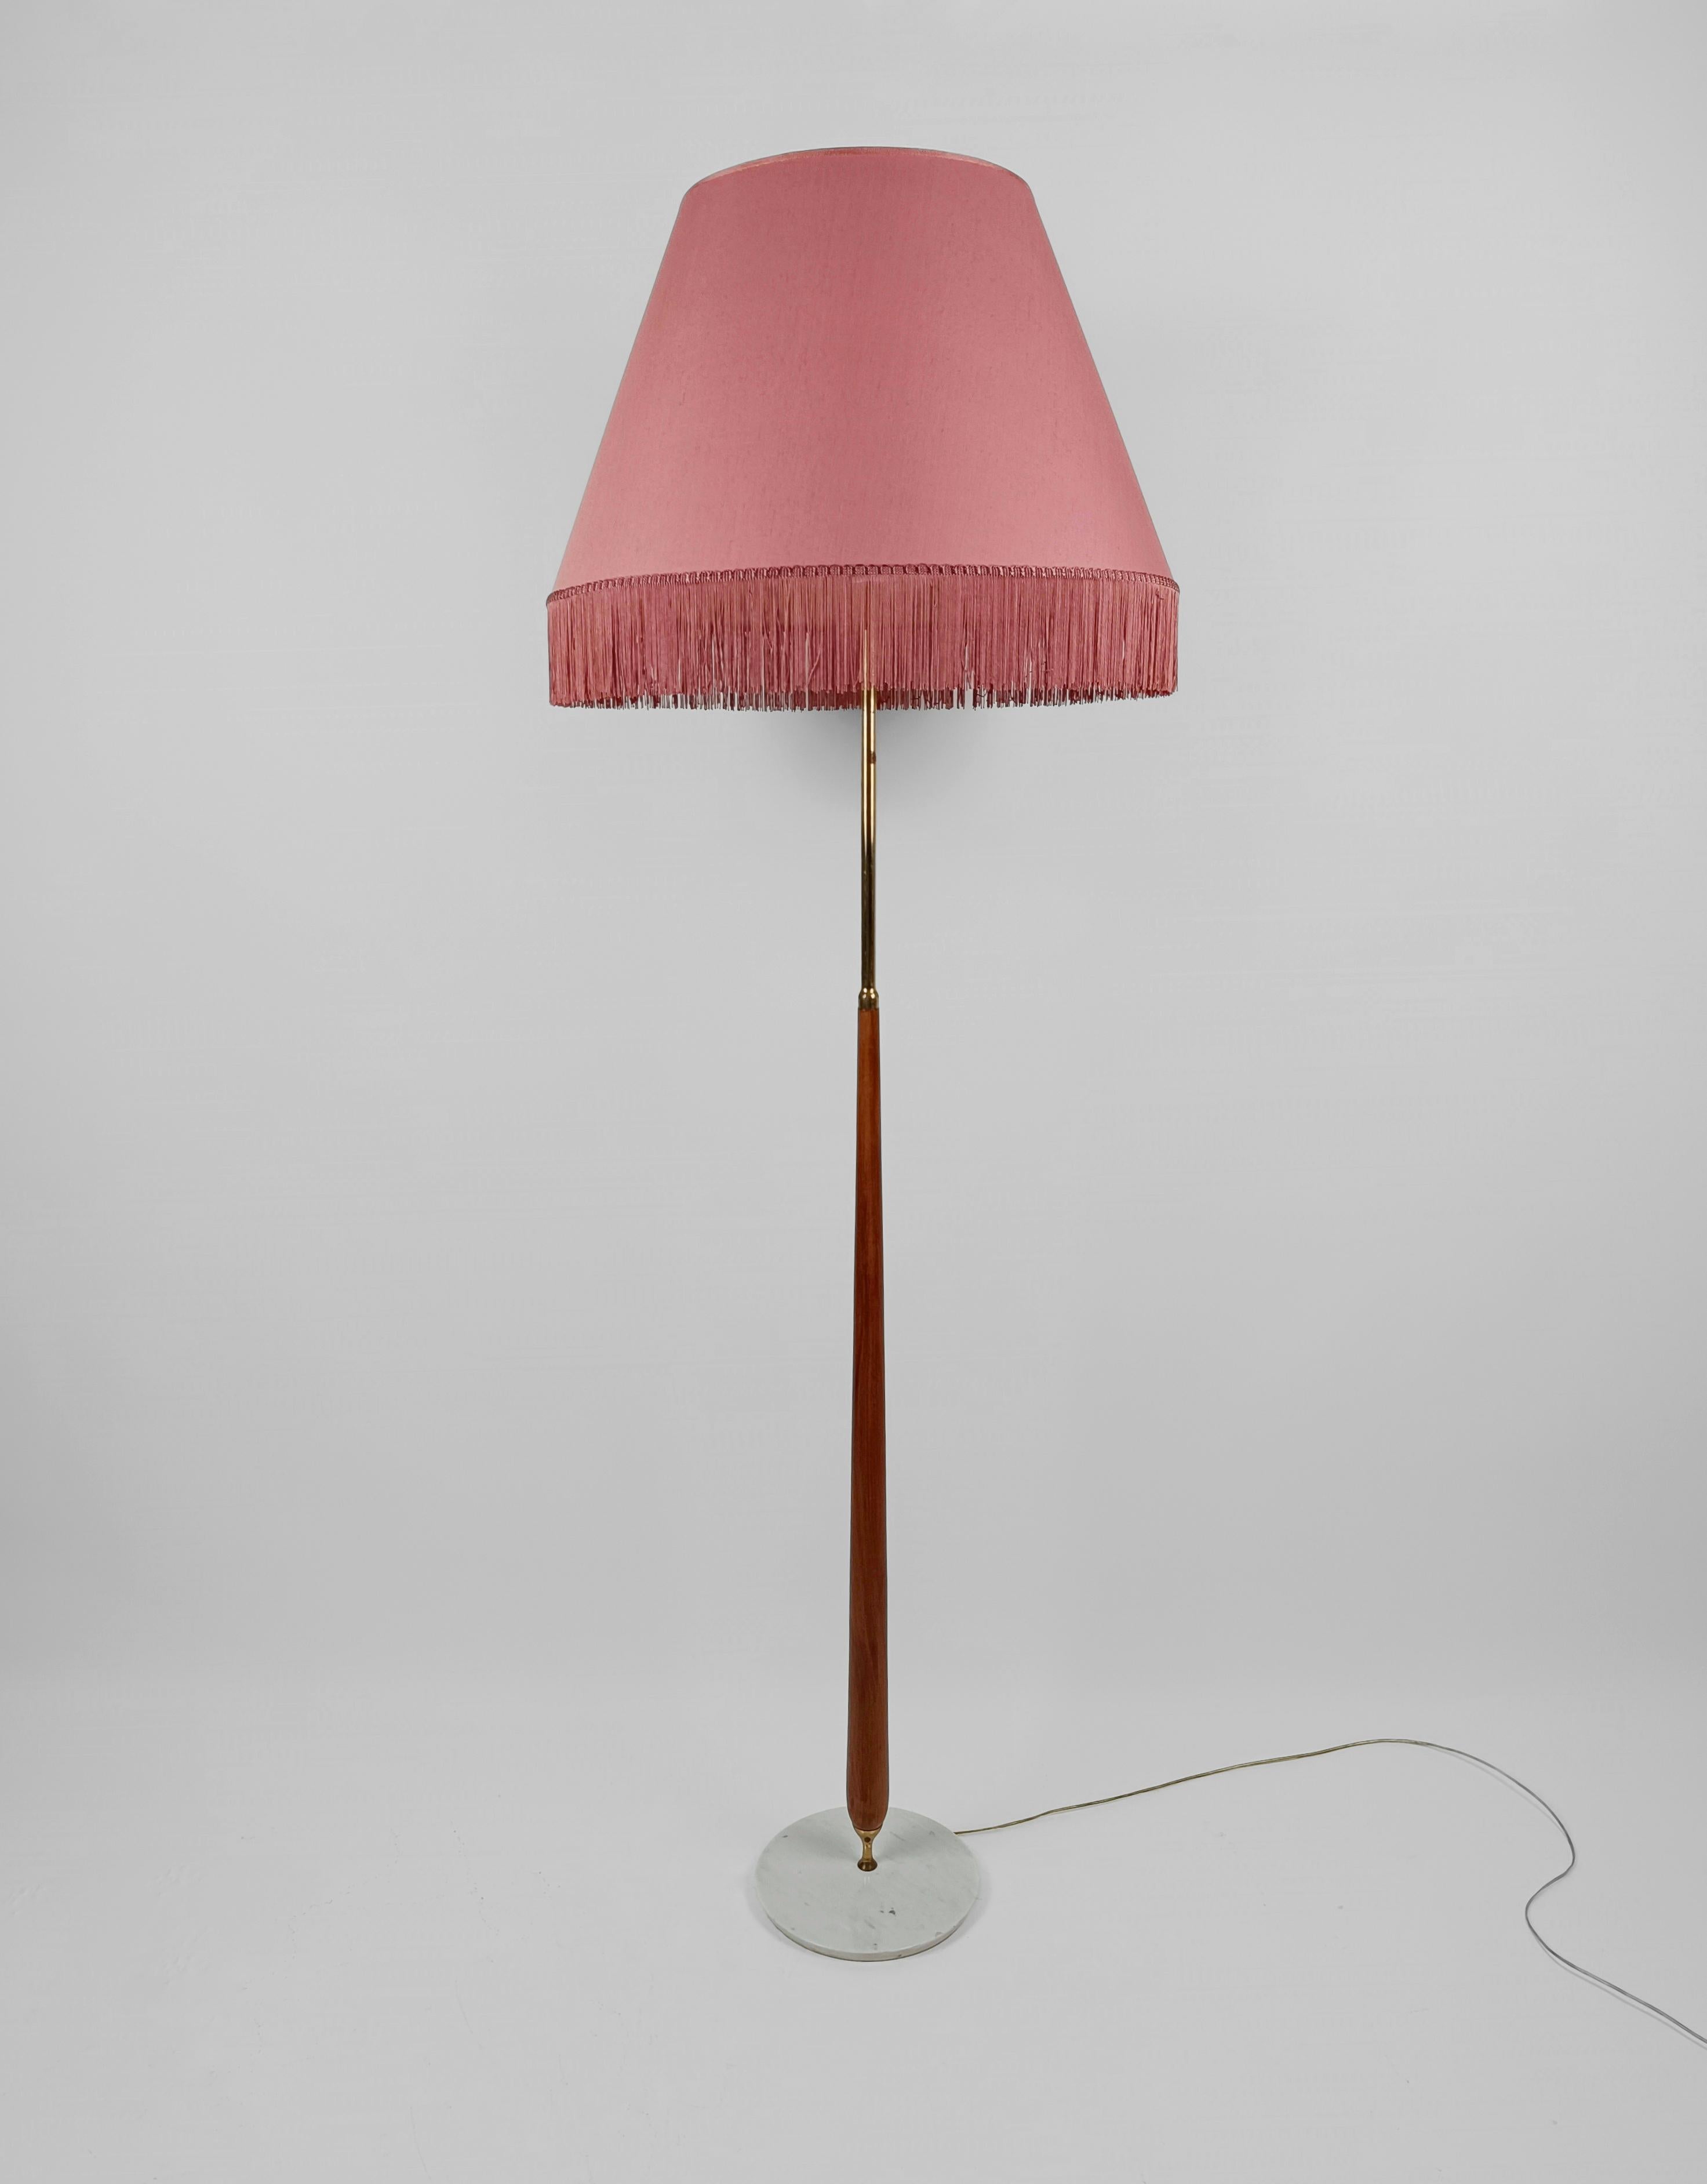 An elegant floor lamp, made in Italy during the 1950s; made with precious materials such as Carrara marble, solid wood and brass.
The design of this Mid Century Modern Floor Lamp is essential, it is all based on the quality of the best handcrafted